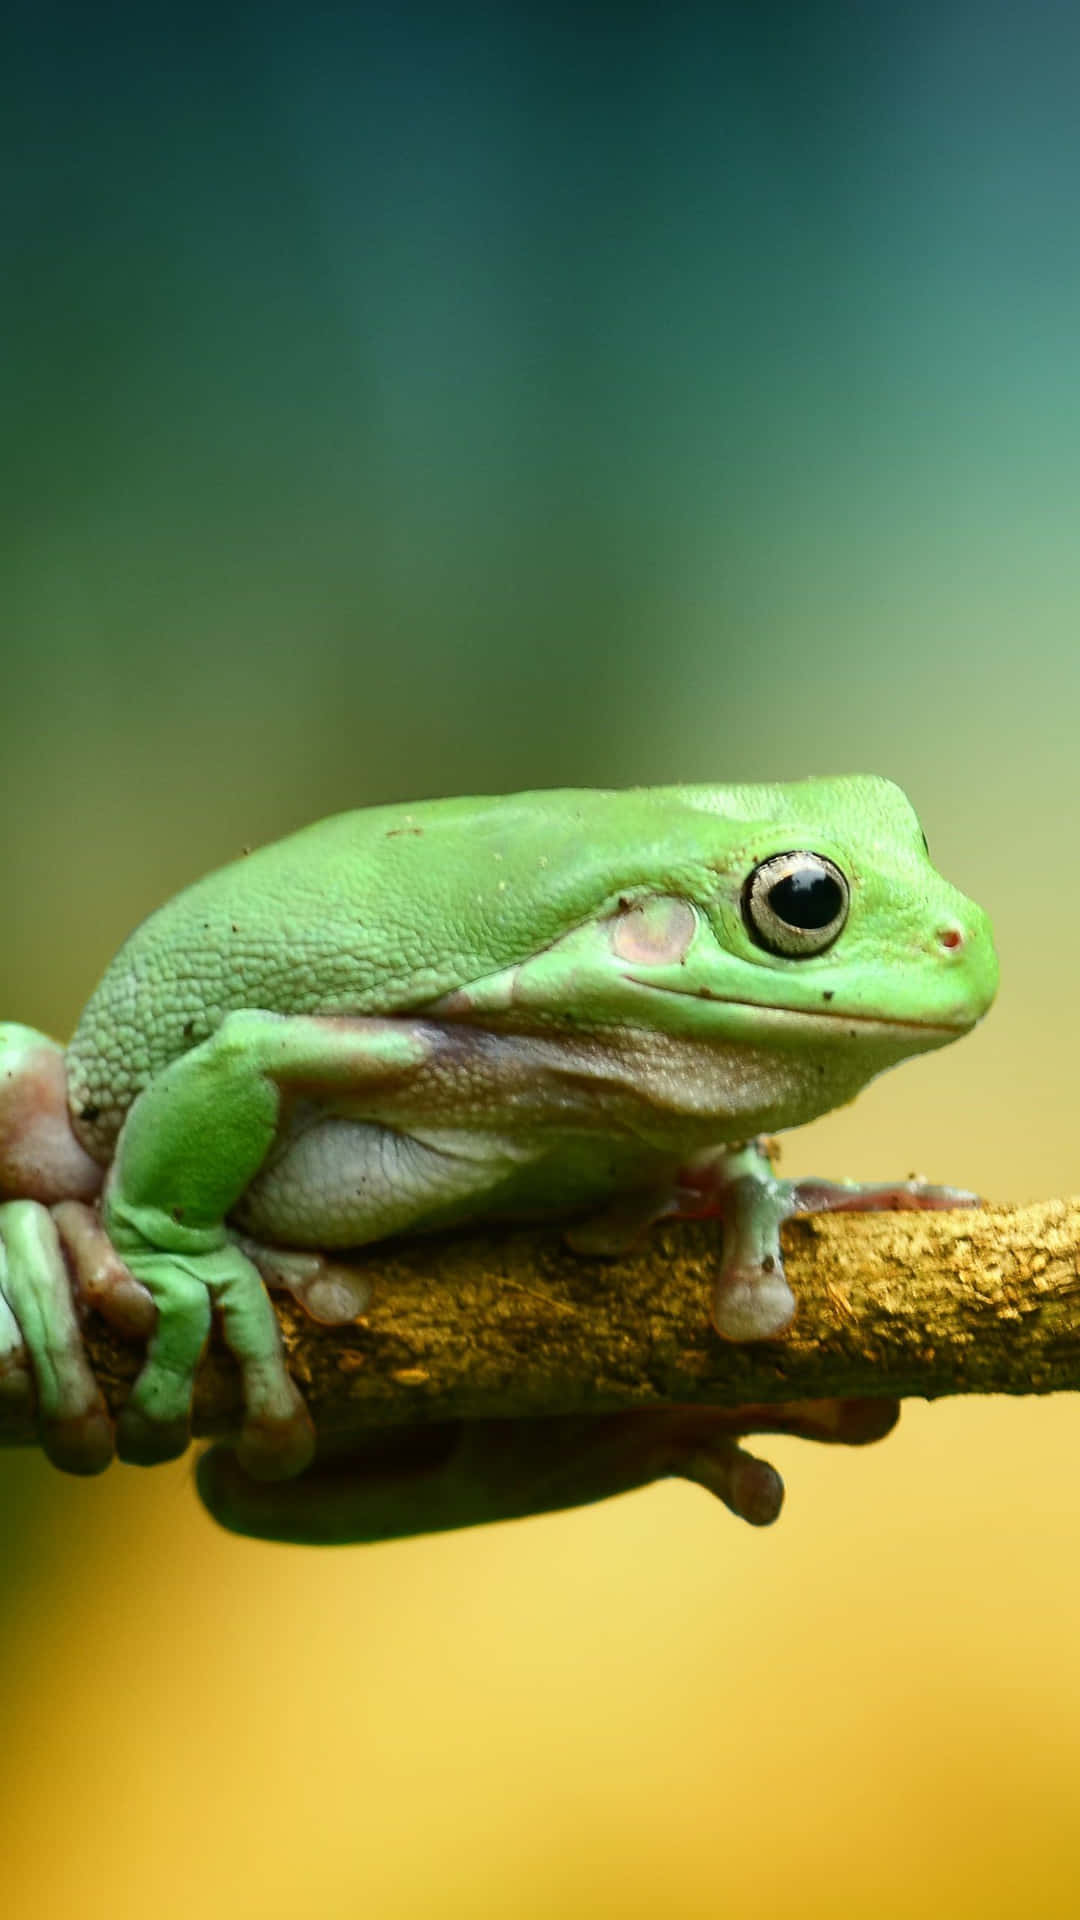 A Bright-Eyed Frog